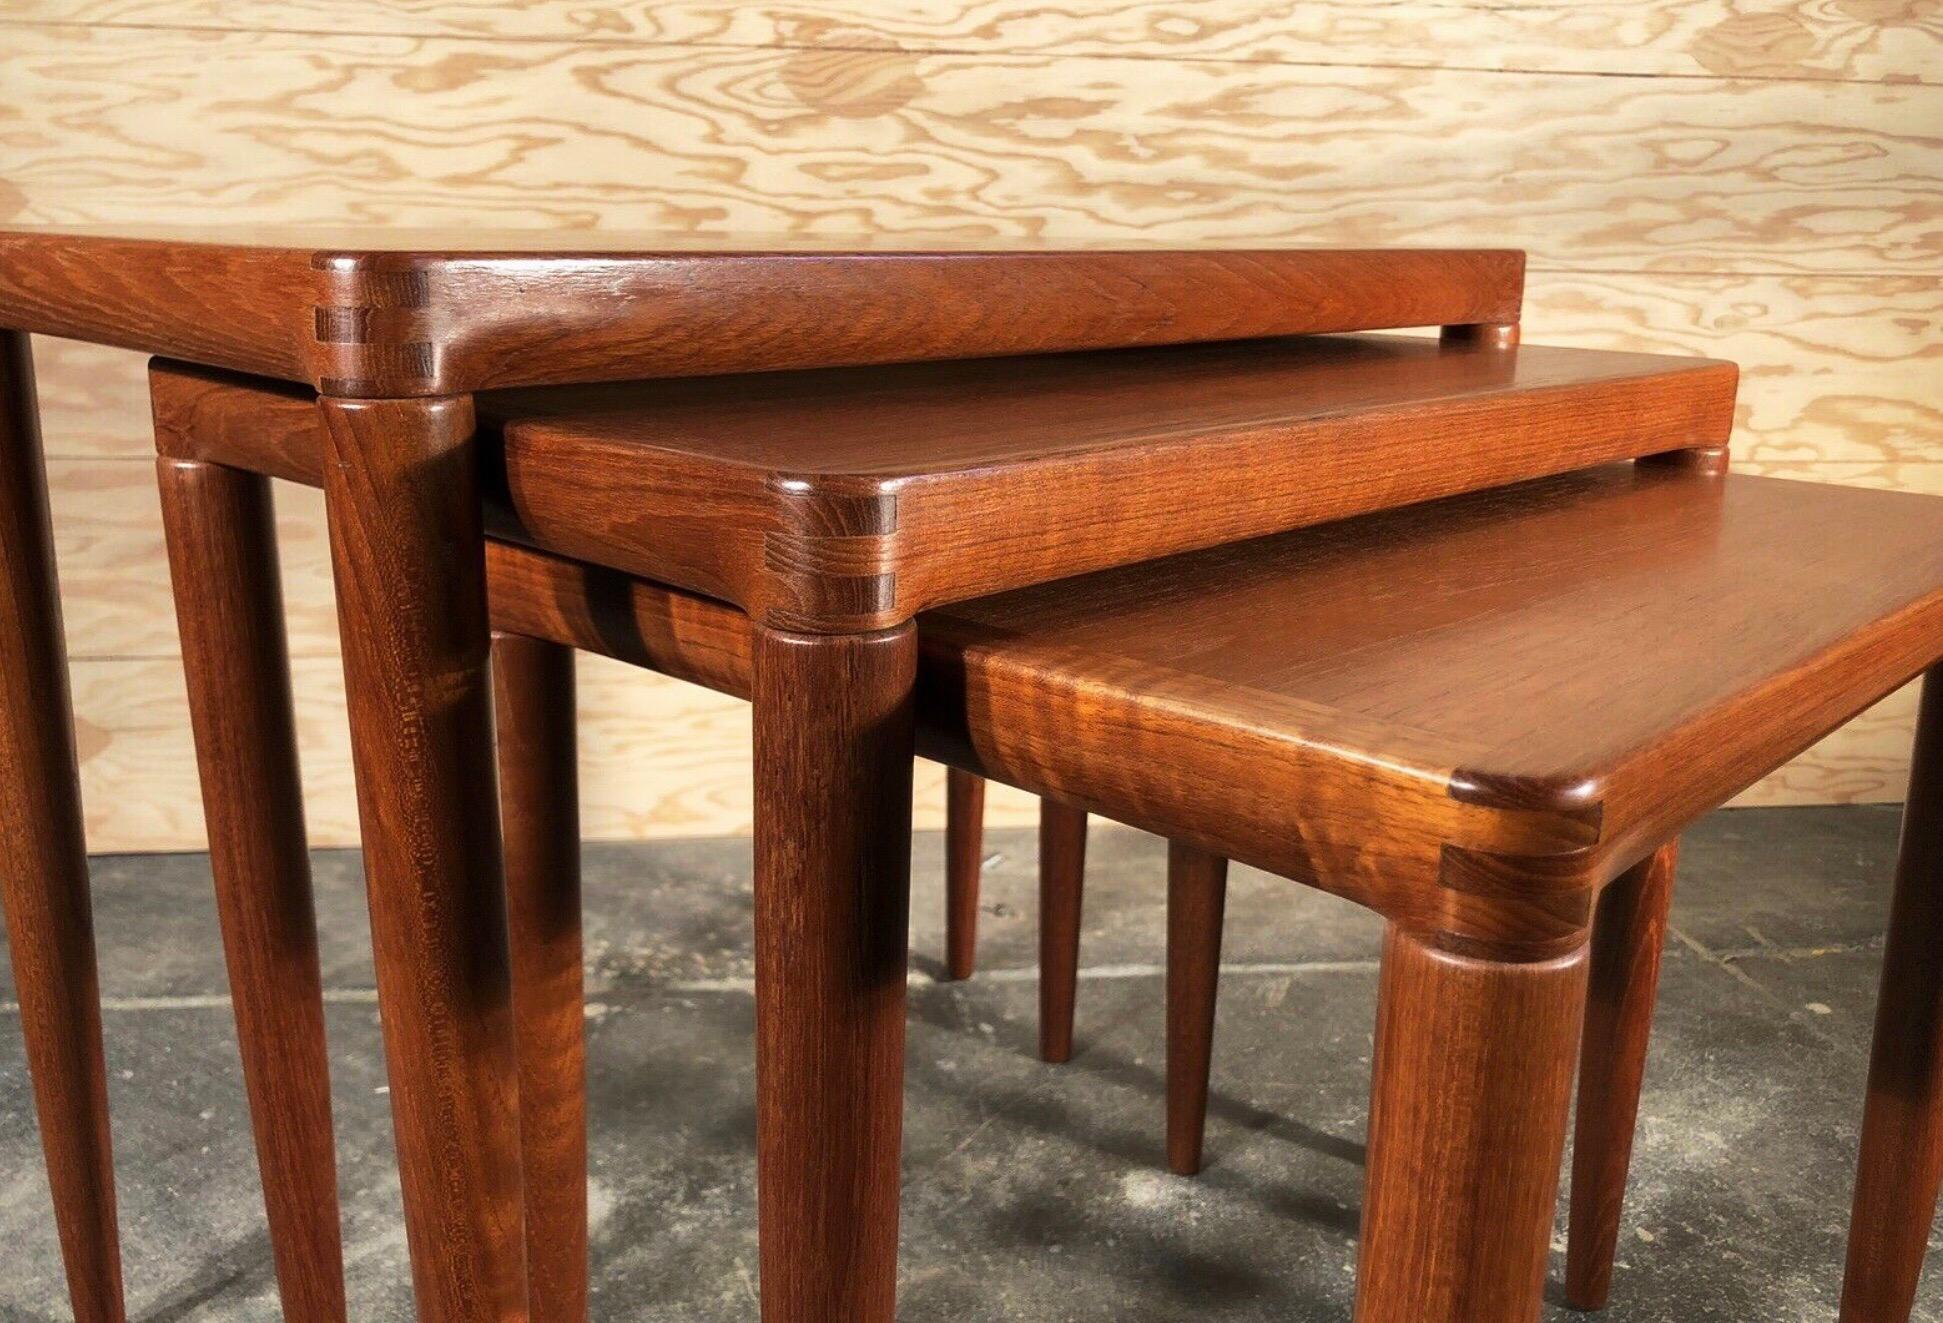 Extremely rare set of nesting tables in the manner of Niels Vodder, circa 1946.
The tables have an extraordinary finish and form. The gentle handling of each leg, the poetic narrowing down each shaft, brings the tables to life, breathing life into